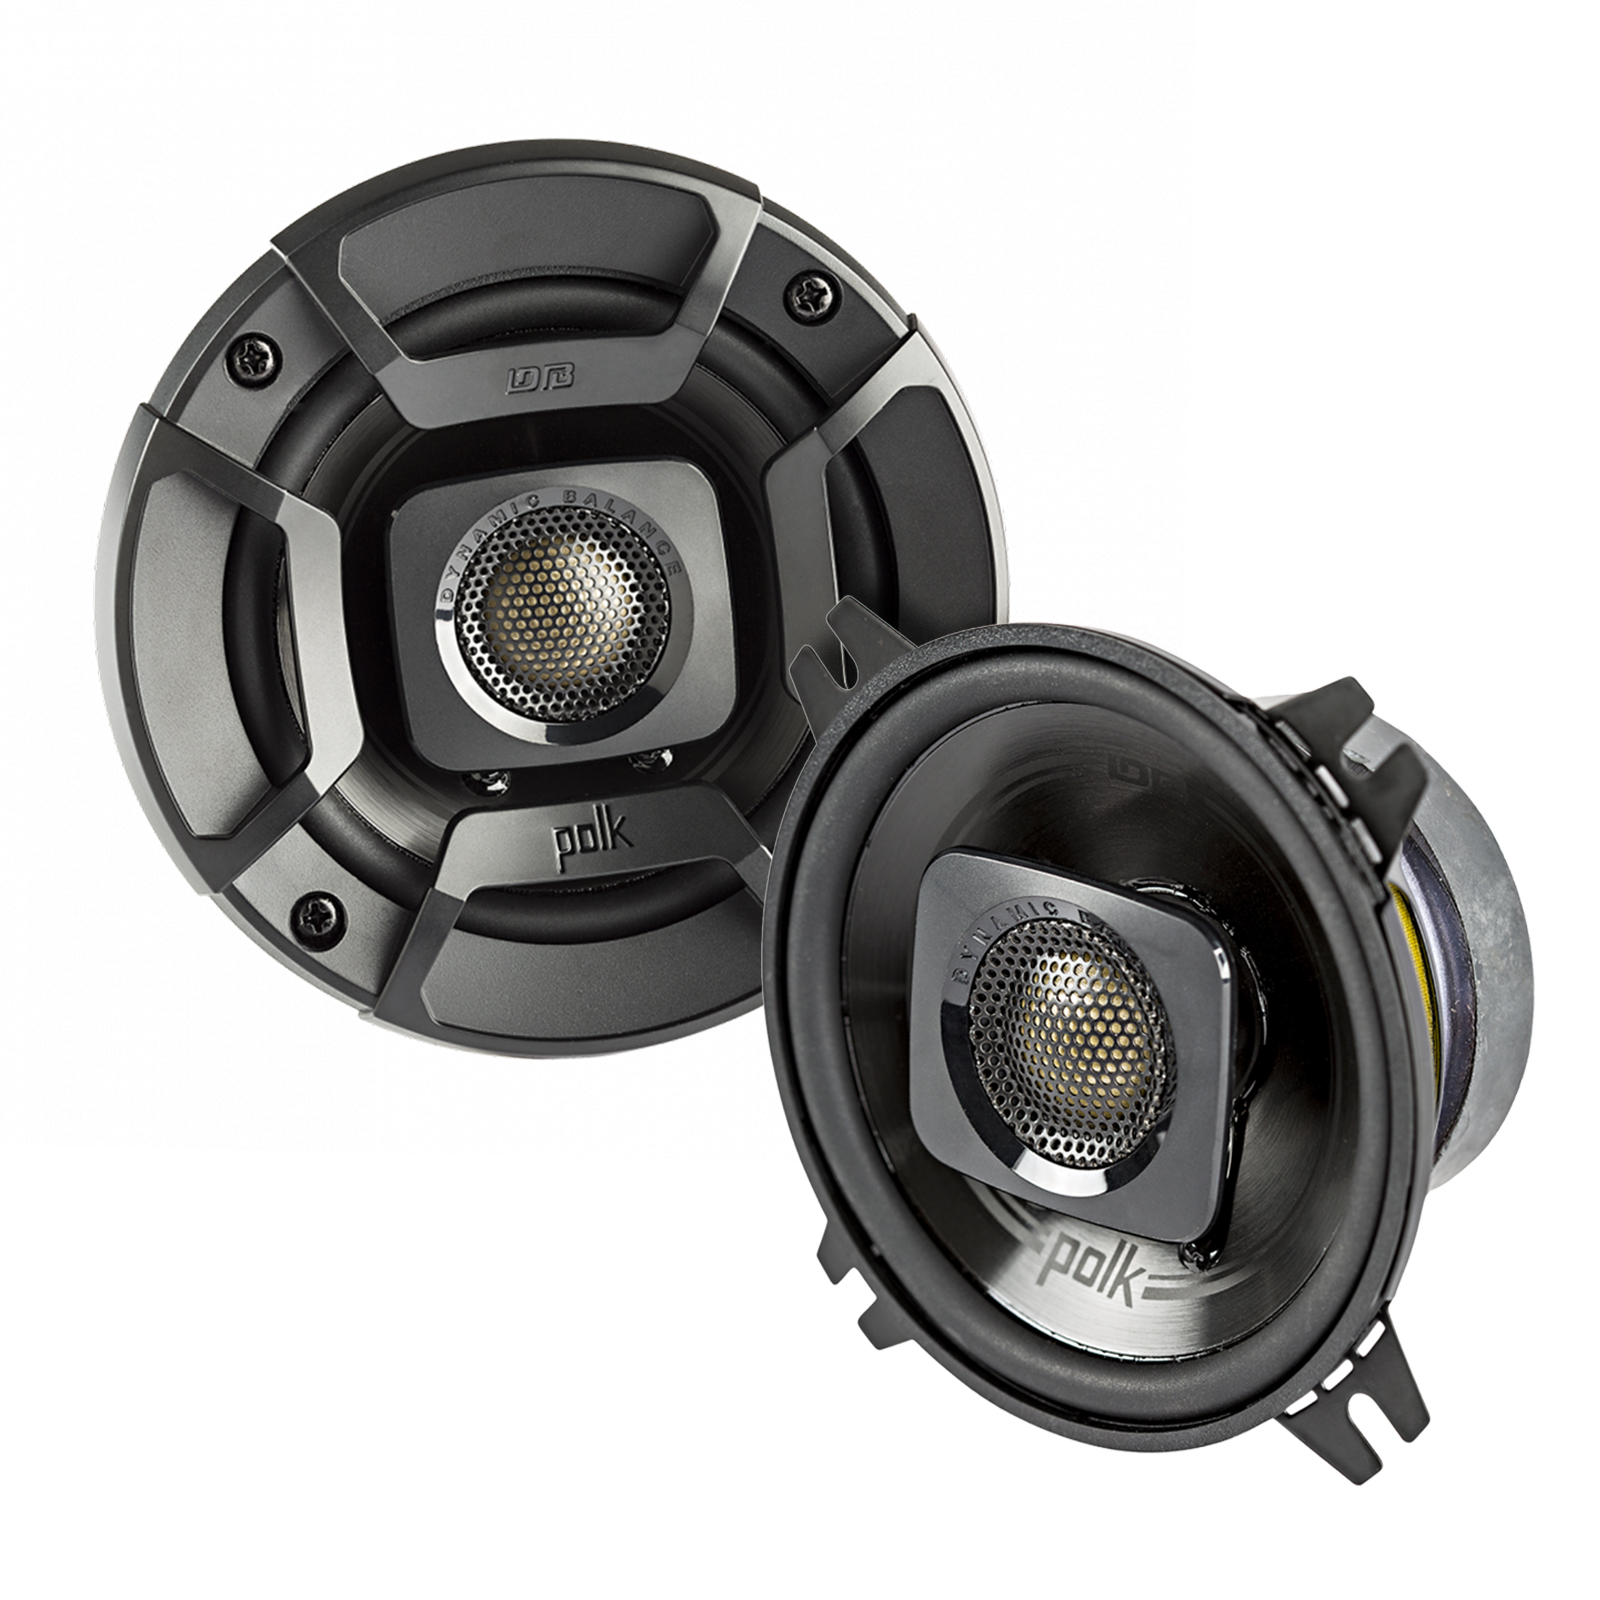 2 Pairs (QTY 4) of Polk Audio DB402 4" 135W Black 2-Way Coaxial Car Speakers + Keychain - image 2 of 2